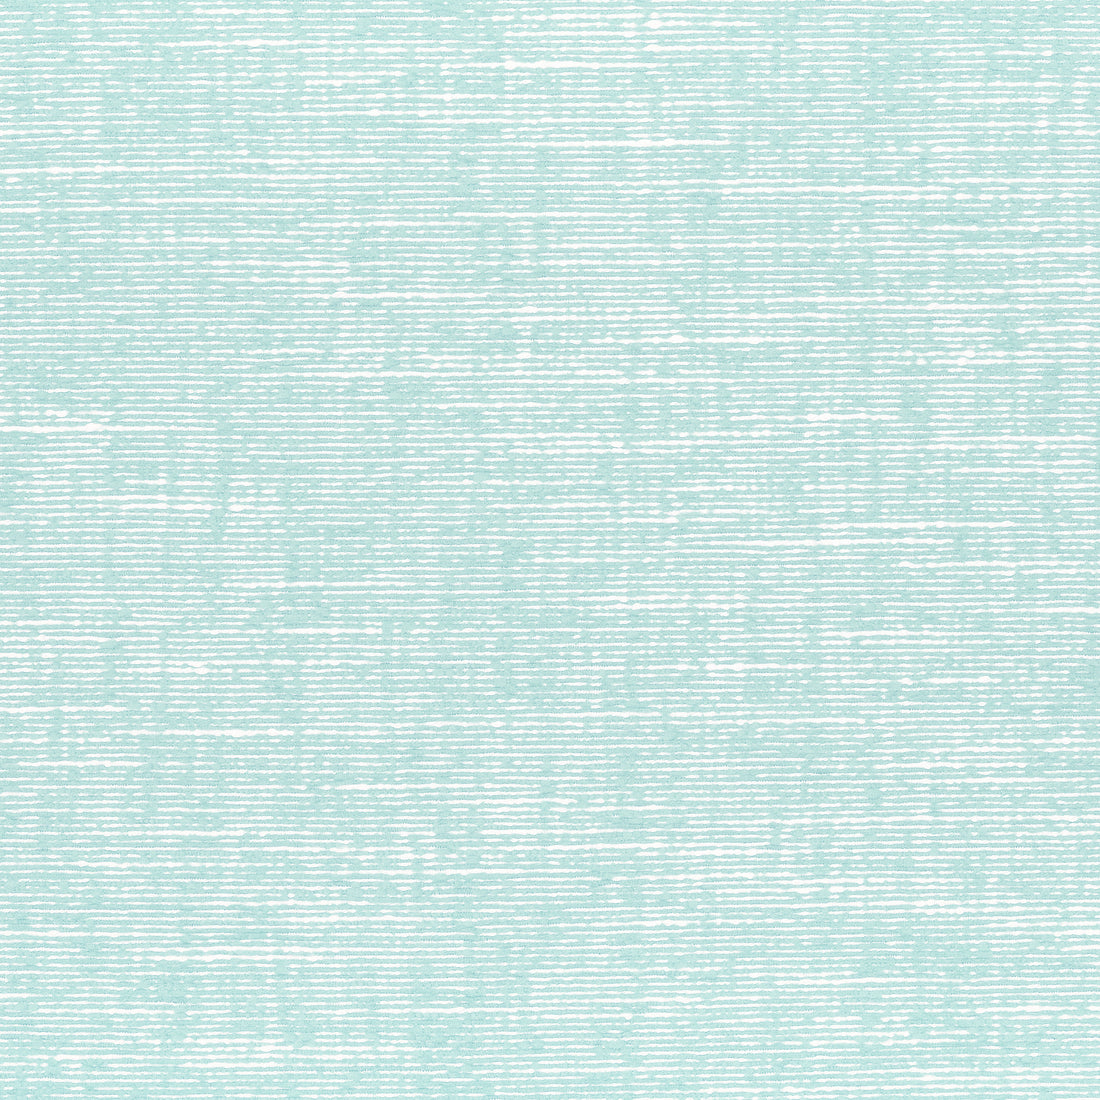 Freeport fabric in aqua color - pattern number W74608 - by Thibaut in the Festival collection